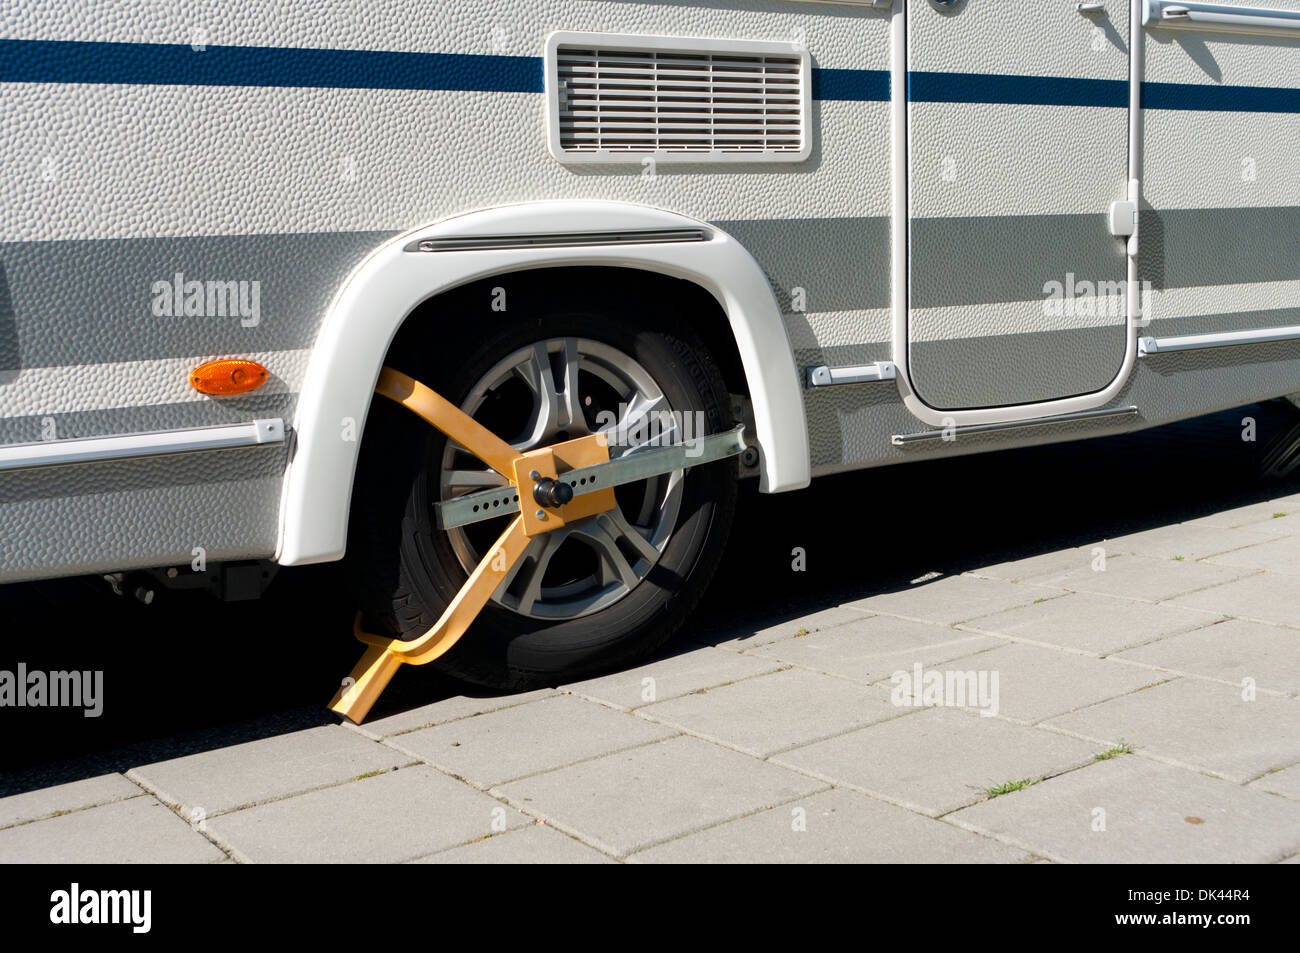 wheel clamp on a mobile home to prevent it from theft Stock Photo